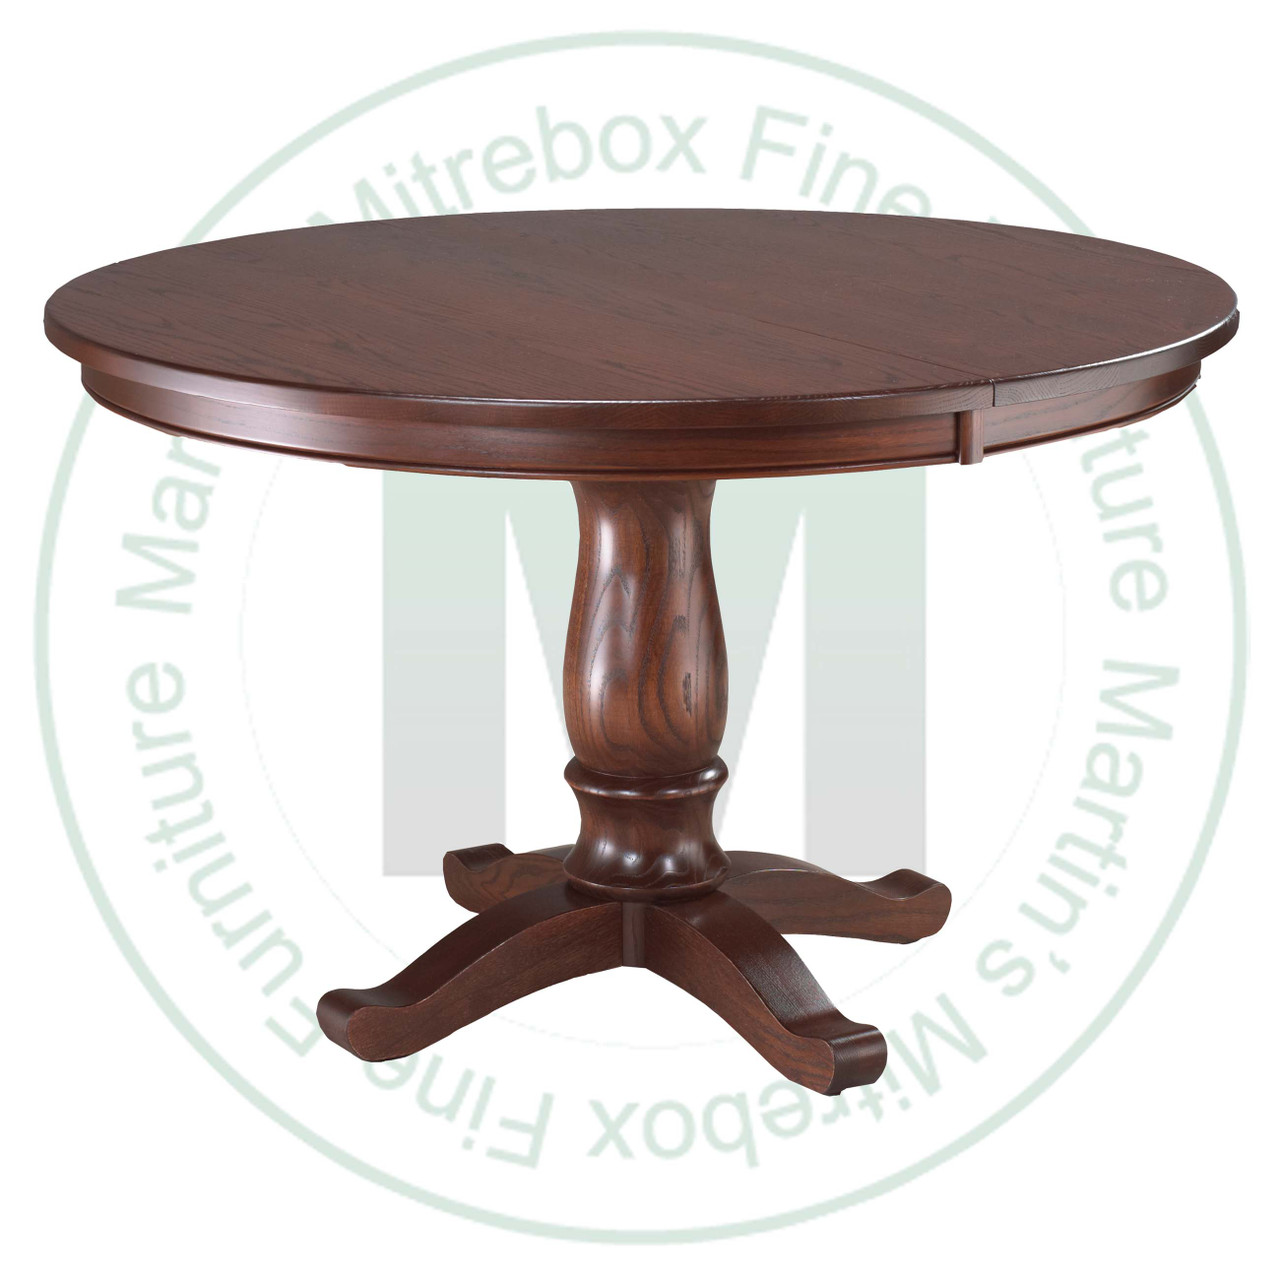 Maple Kimberly Crest Single Pedestal Table 36''D x 54''W x 30''H Round Solid Table. Table Has 1'' Thick Top.